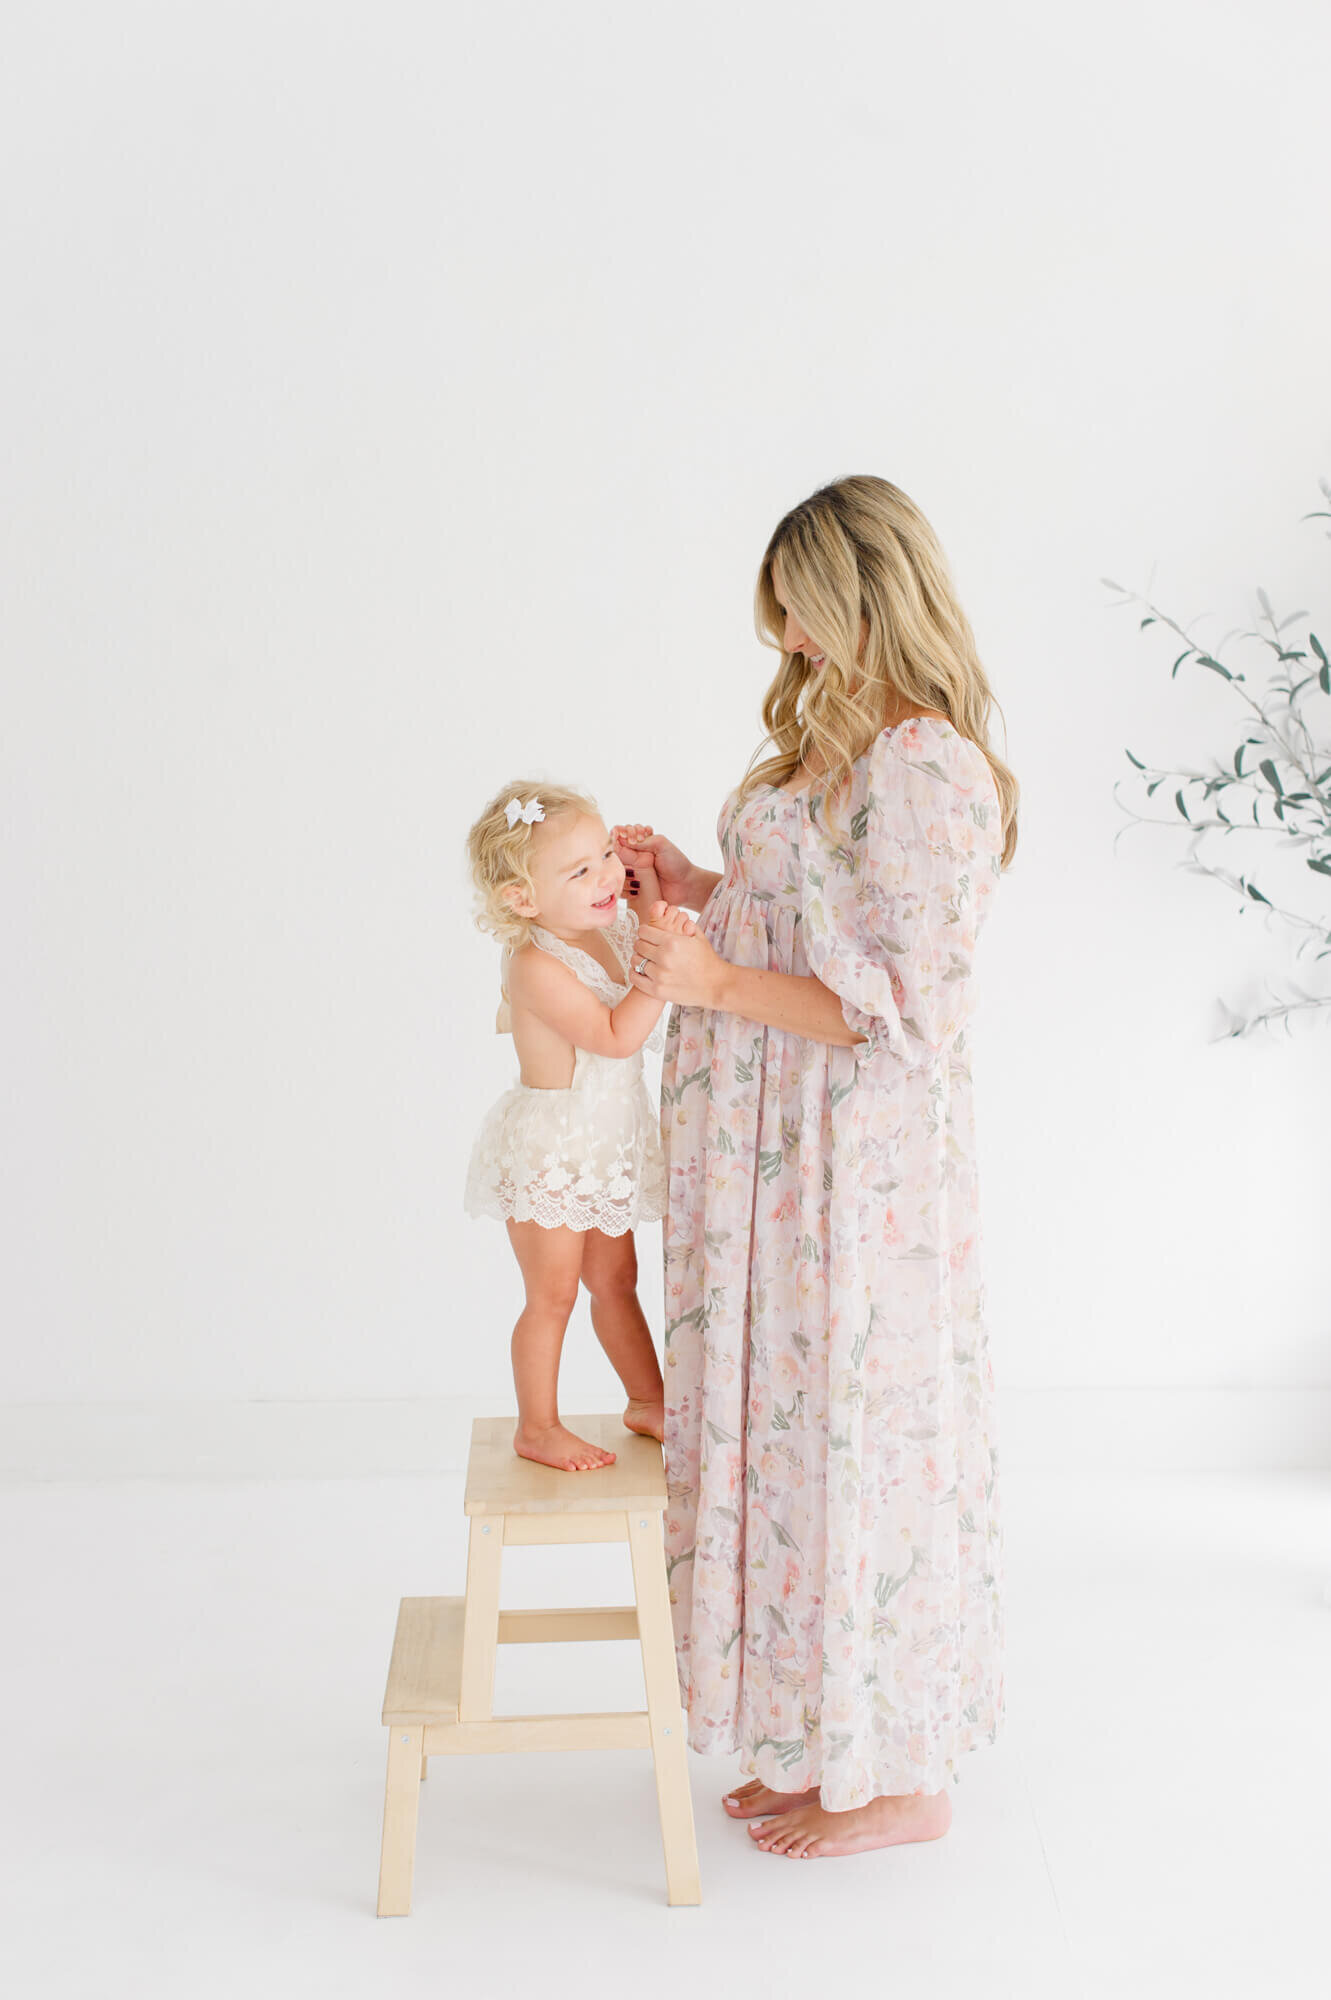 Studio session with daughter standing on wooden step stool holding her daughters hands